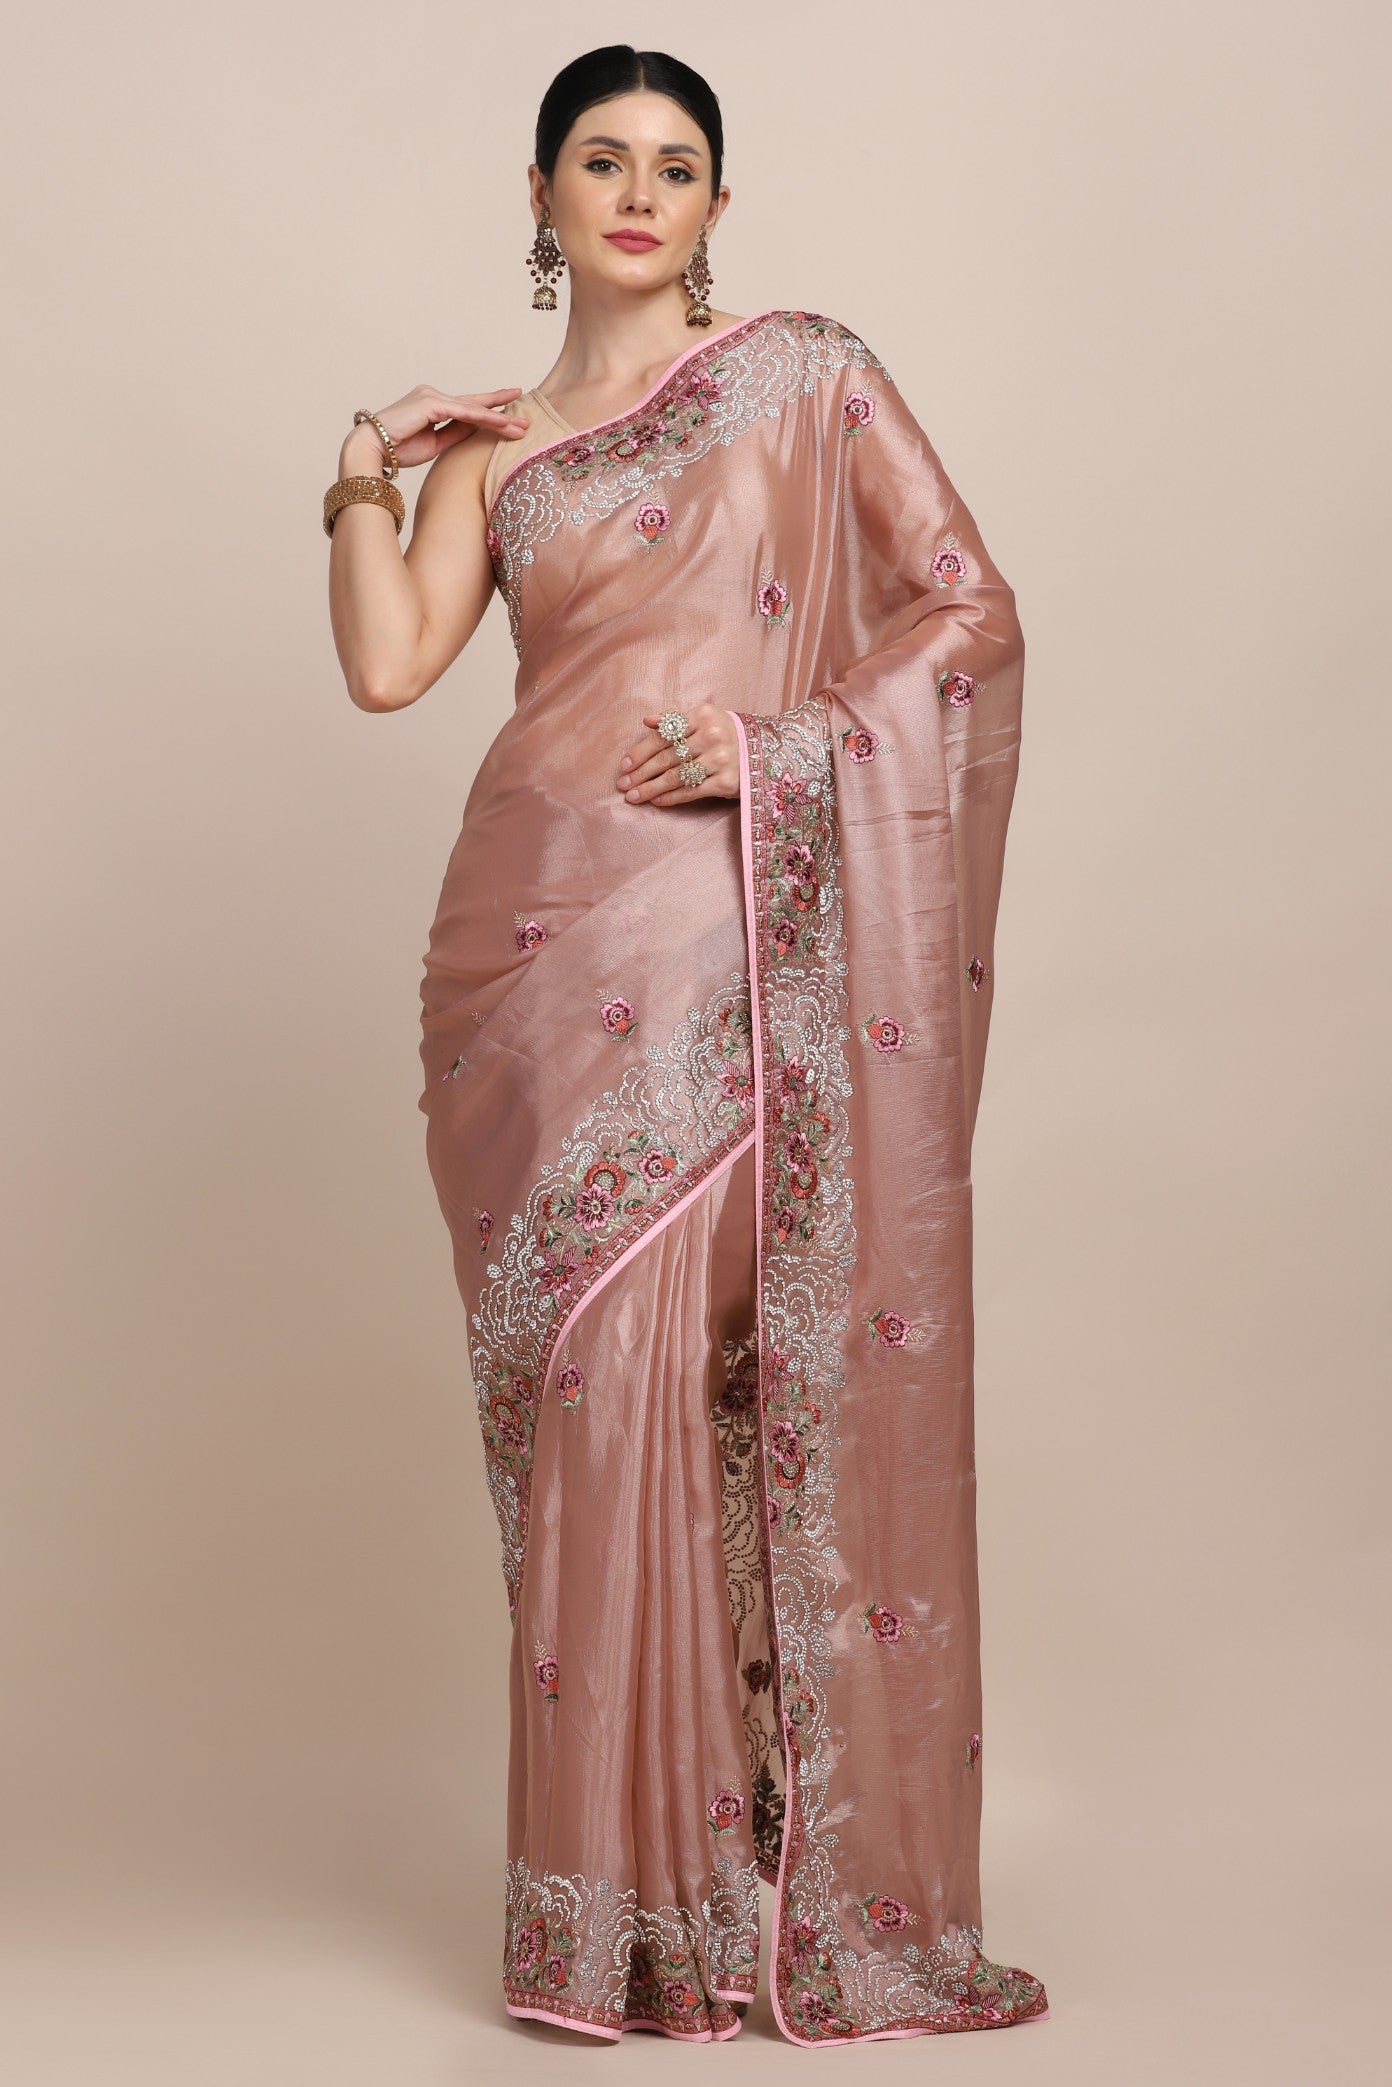 Full look of Onion pink floral embroidered saree